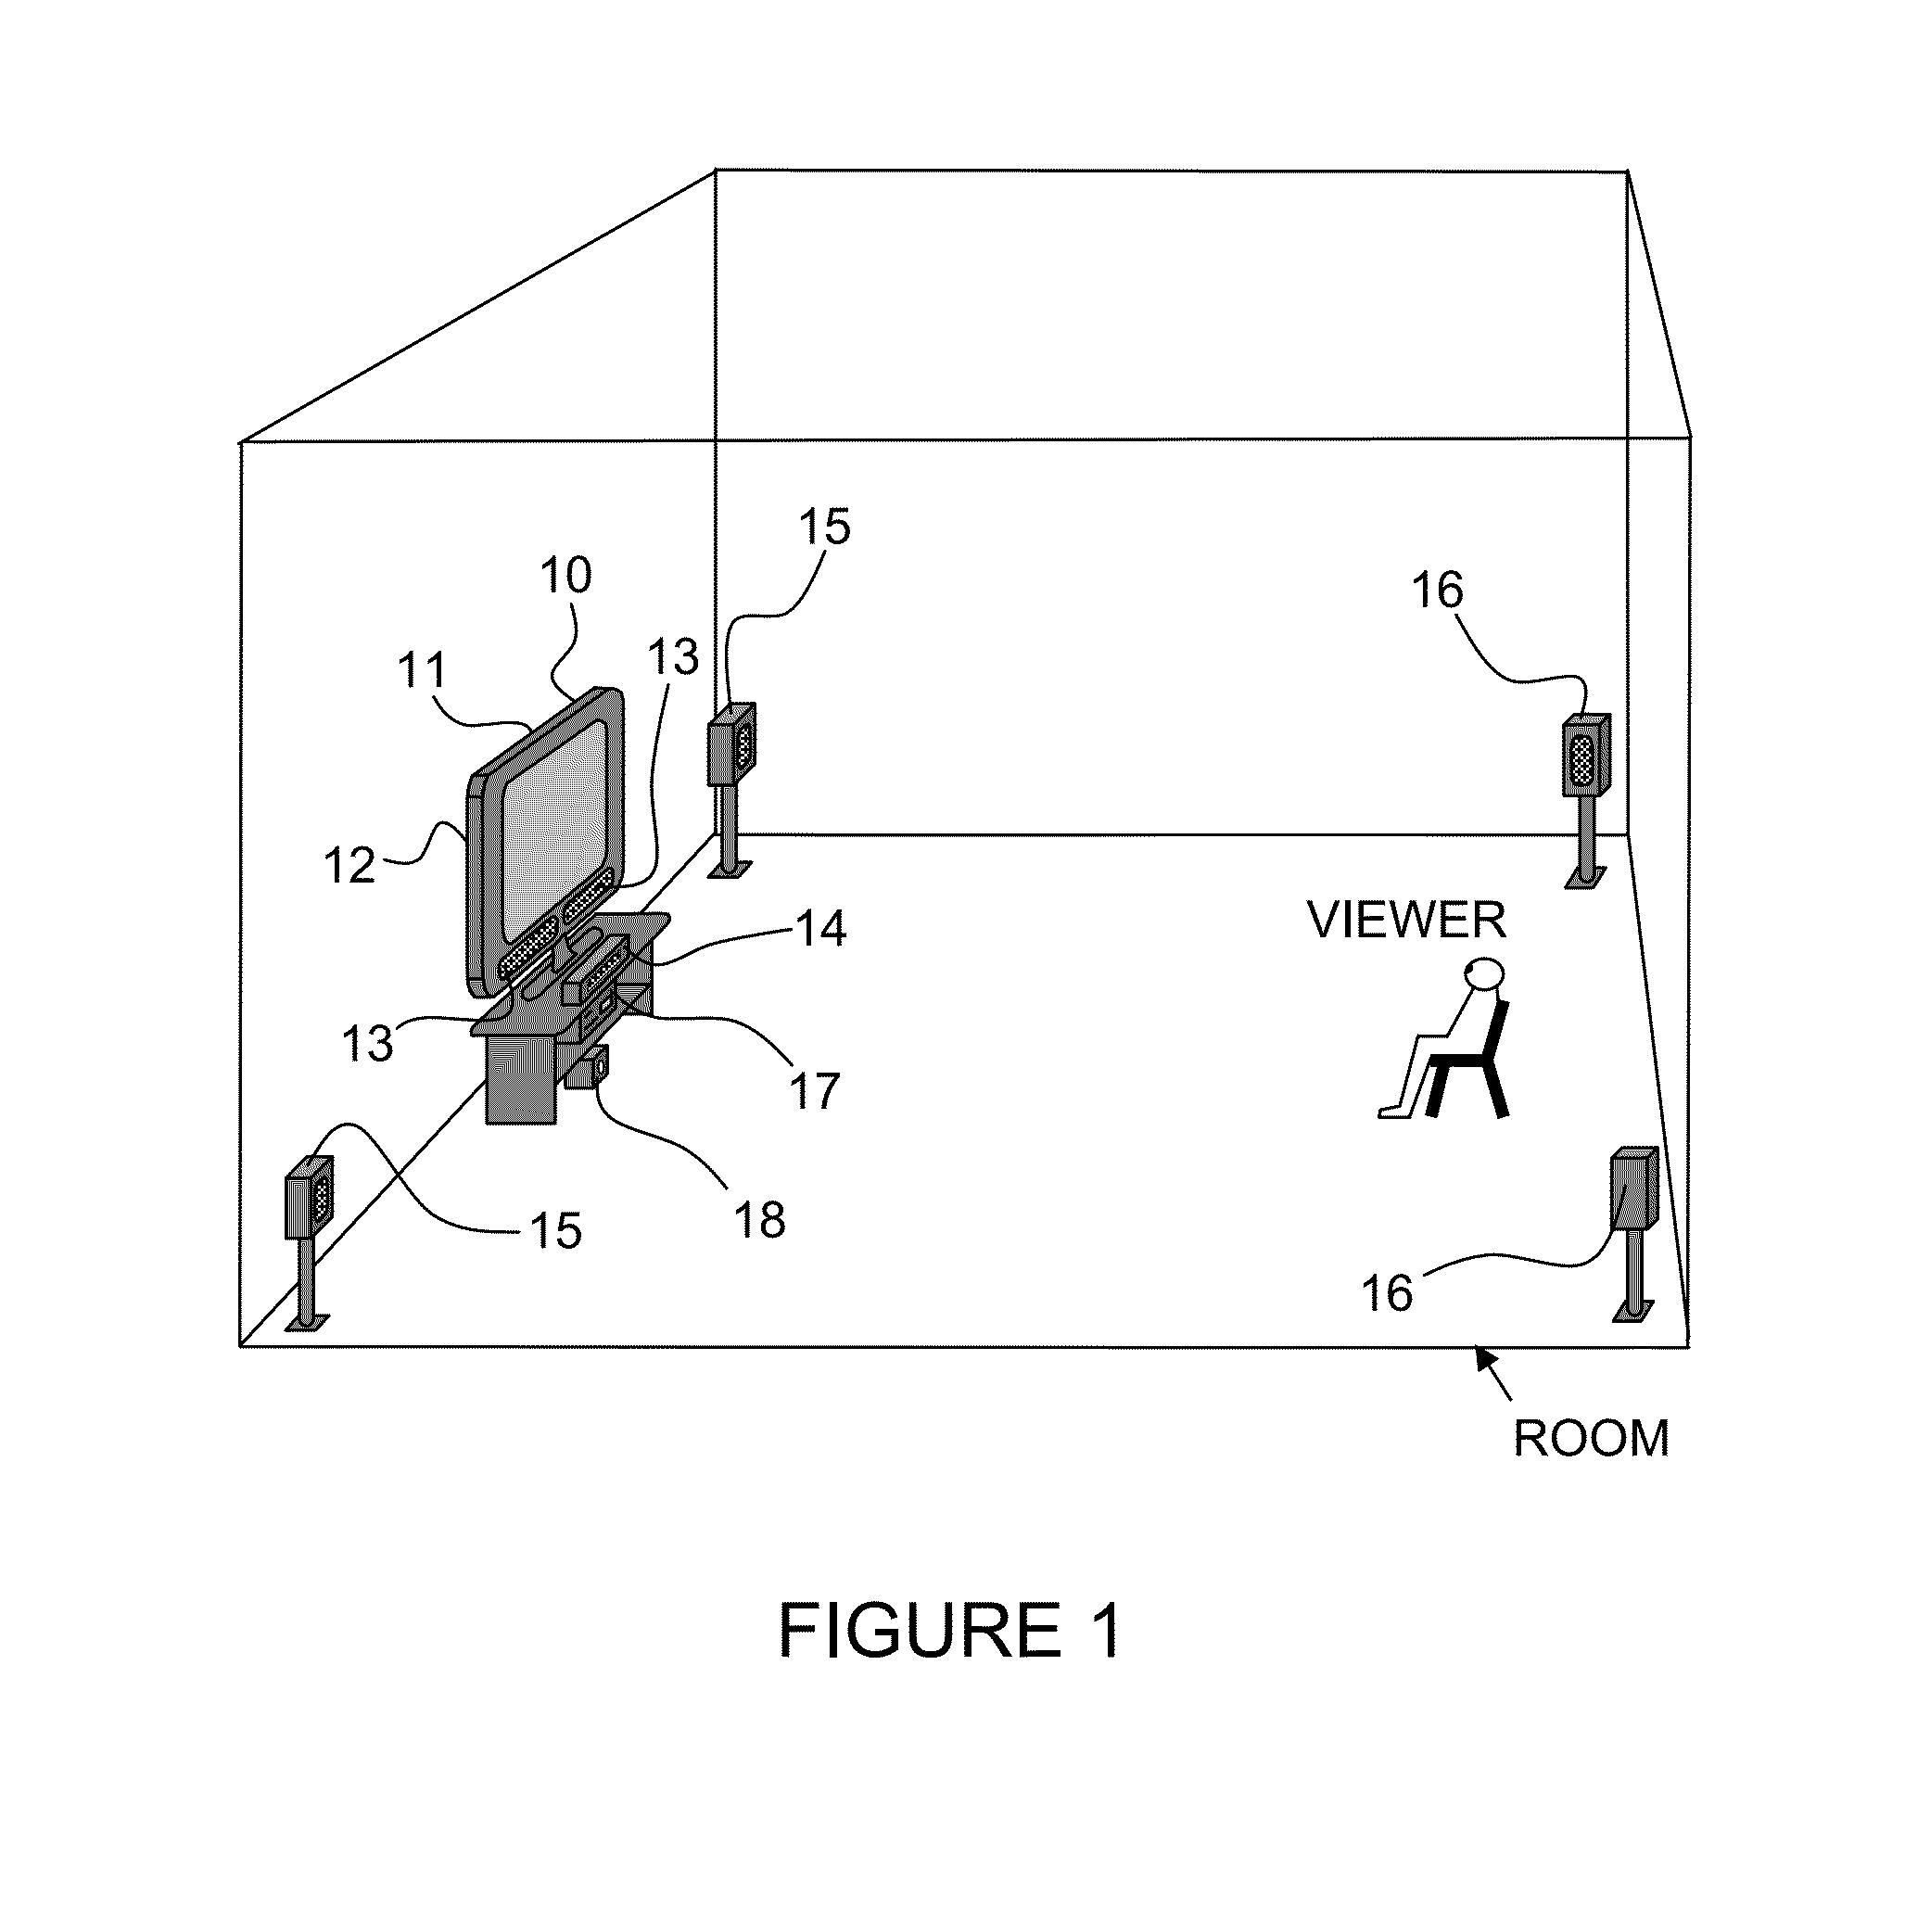 Flat panel displaying and sounding system integrating flat panel display with flat panel sounding unit array